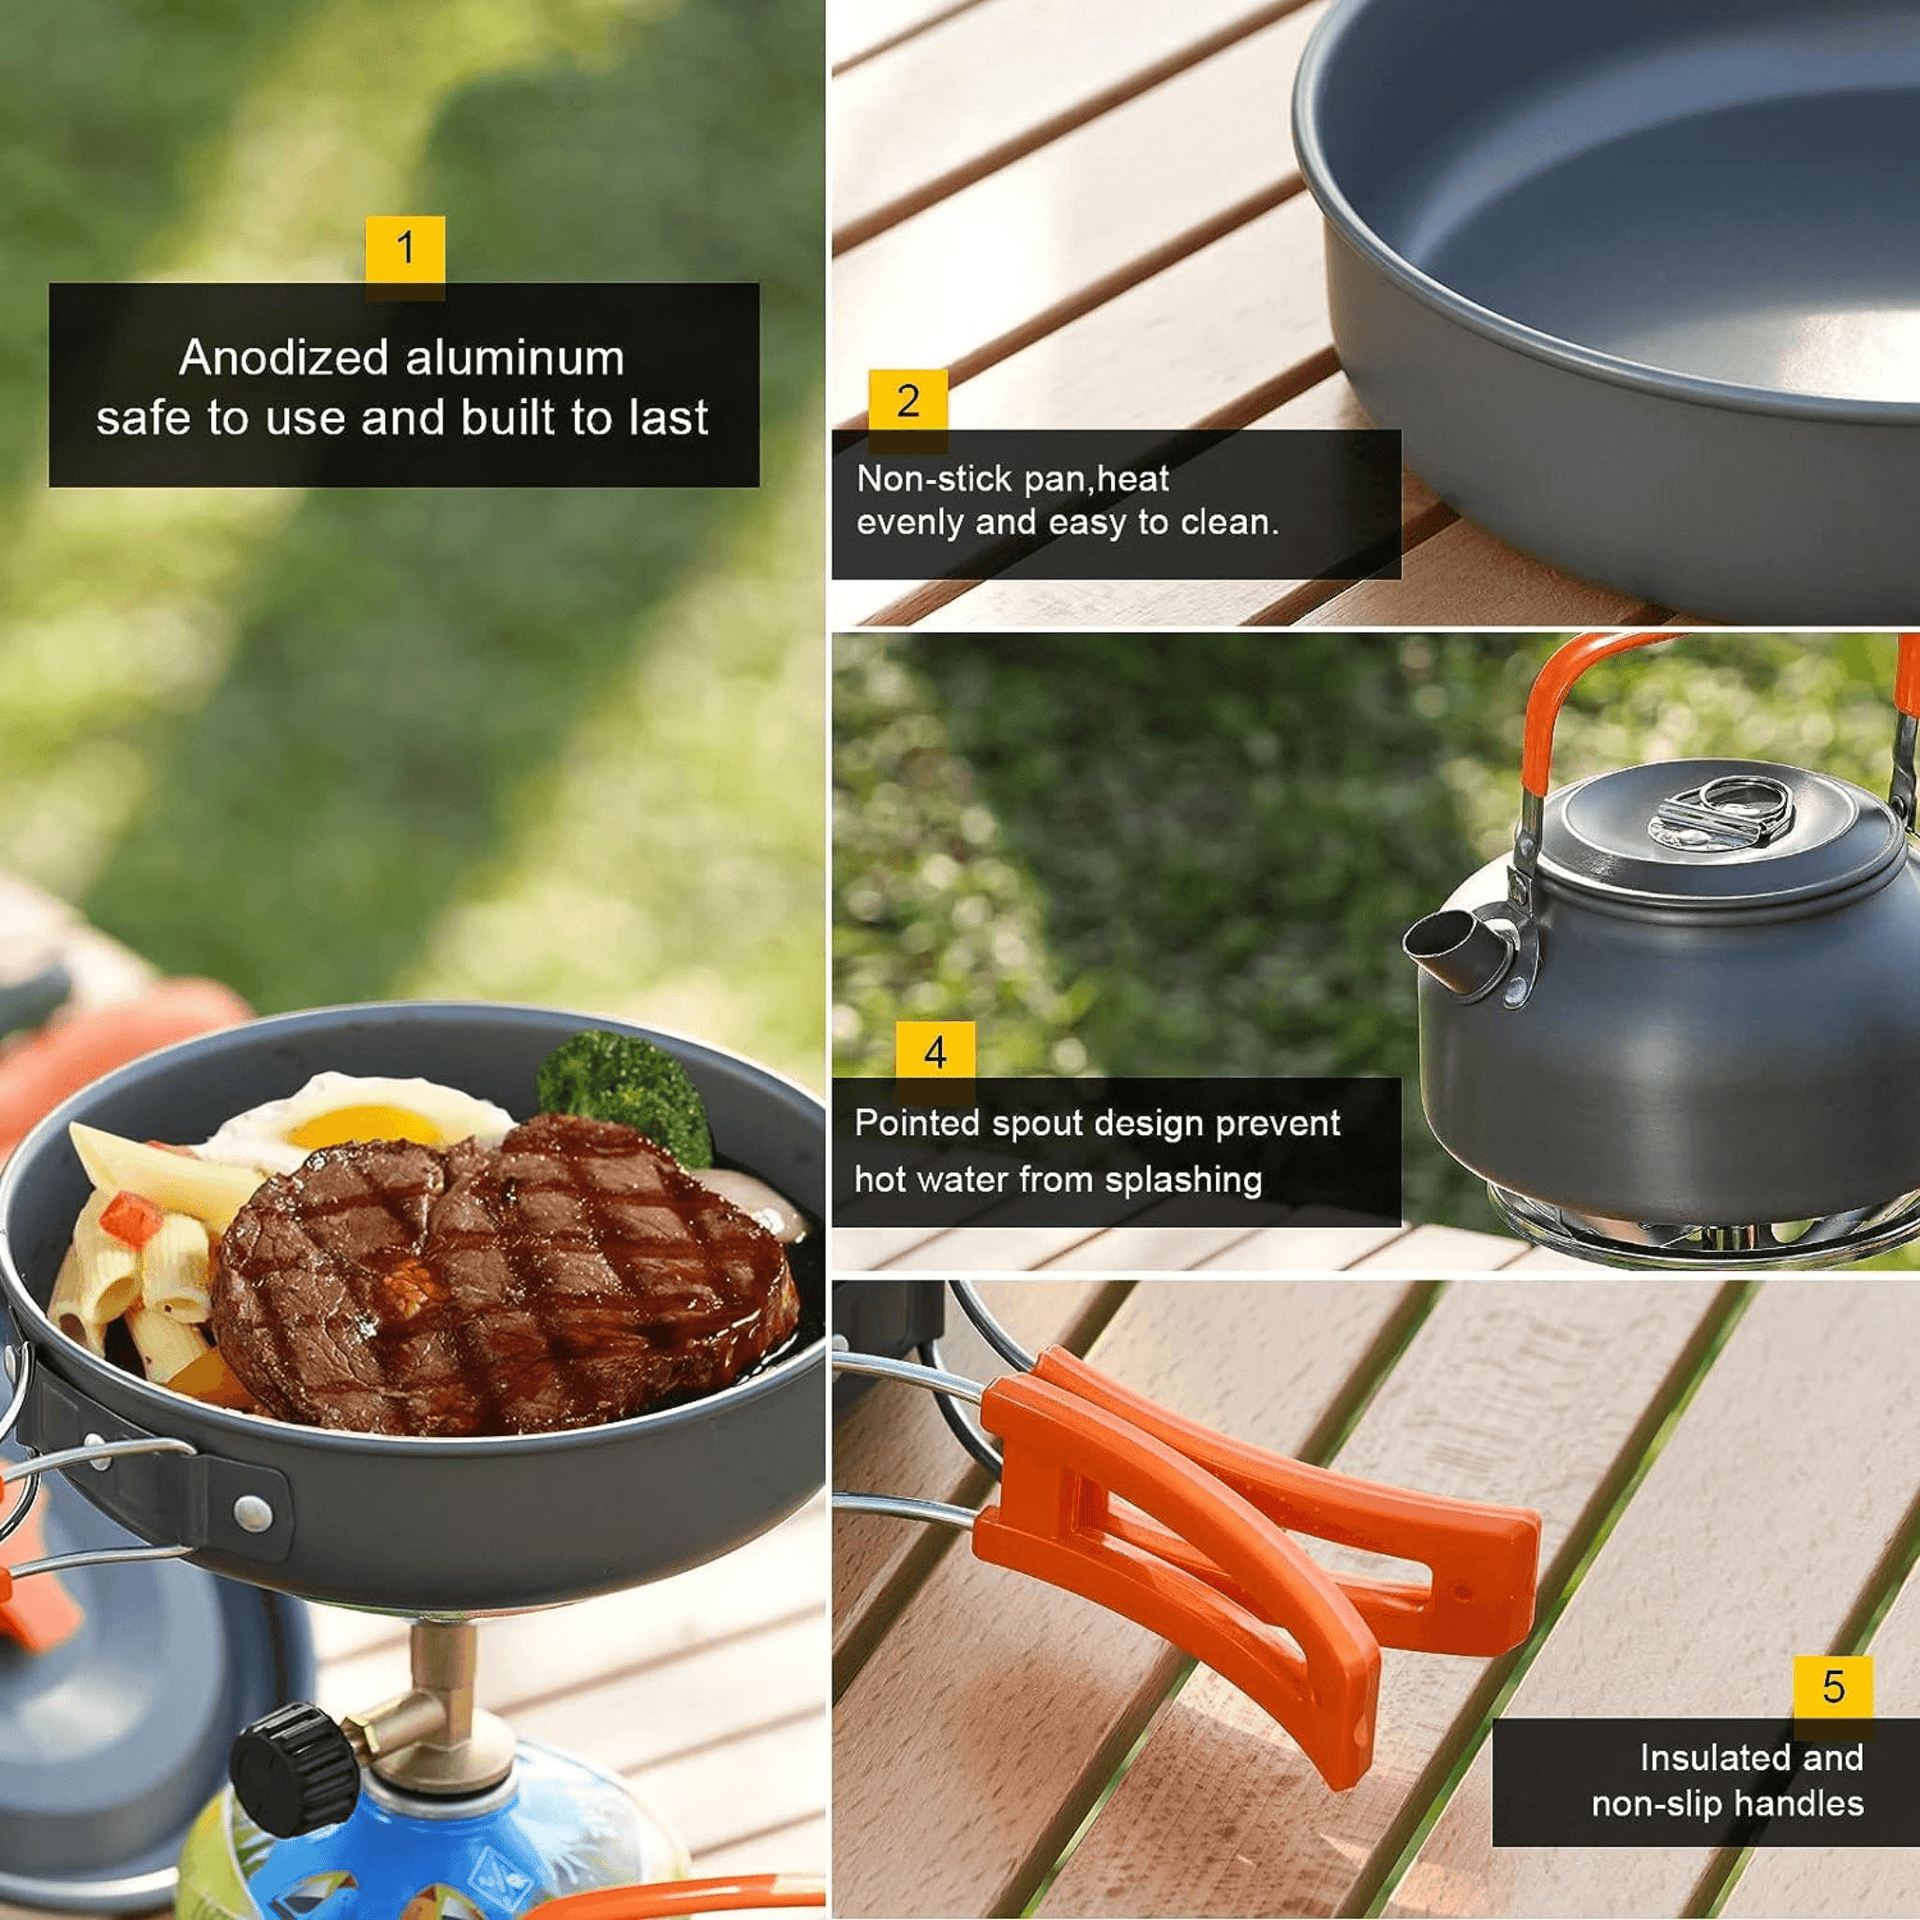 Tableware & Cookware - About Camping